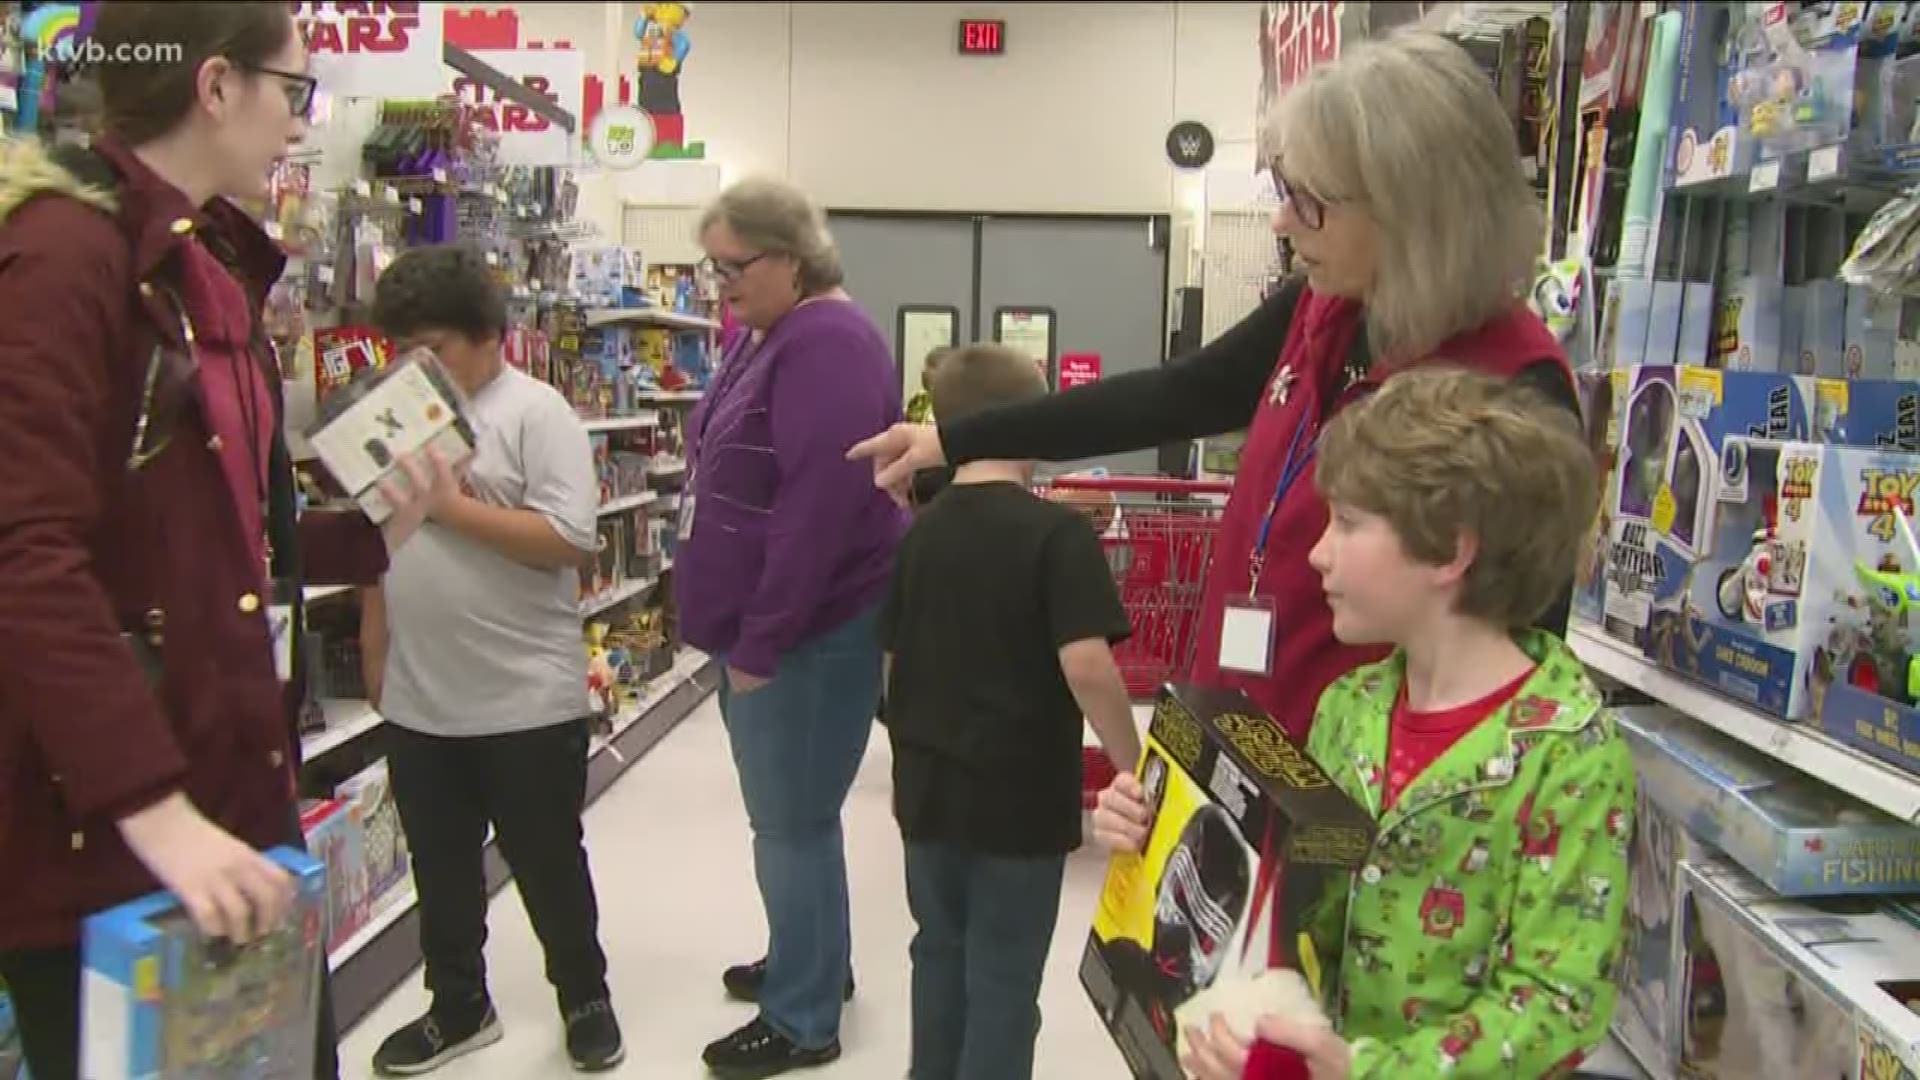 180 kids were given gift cards to go on a shopping spree at Target.